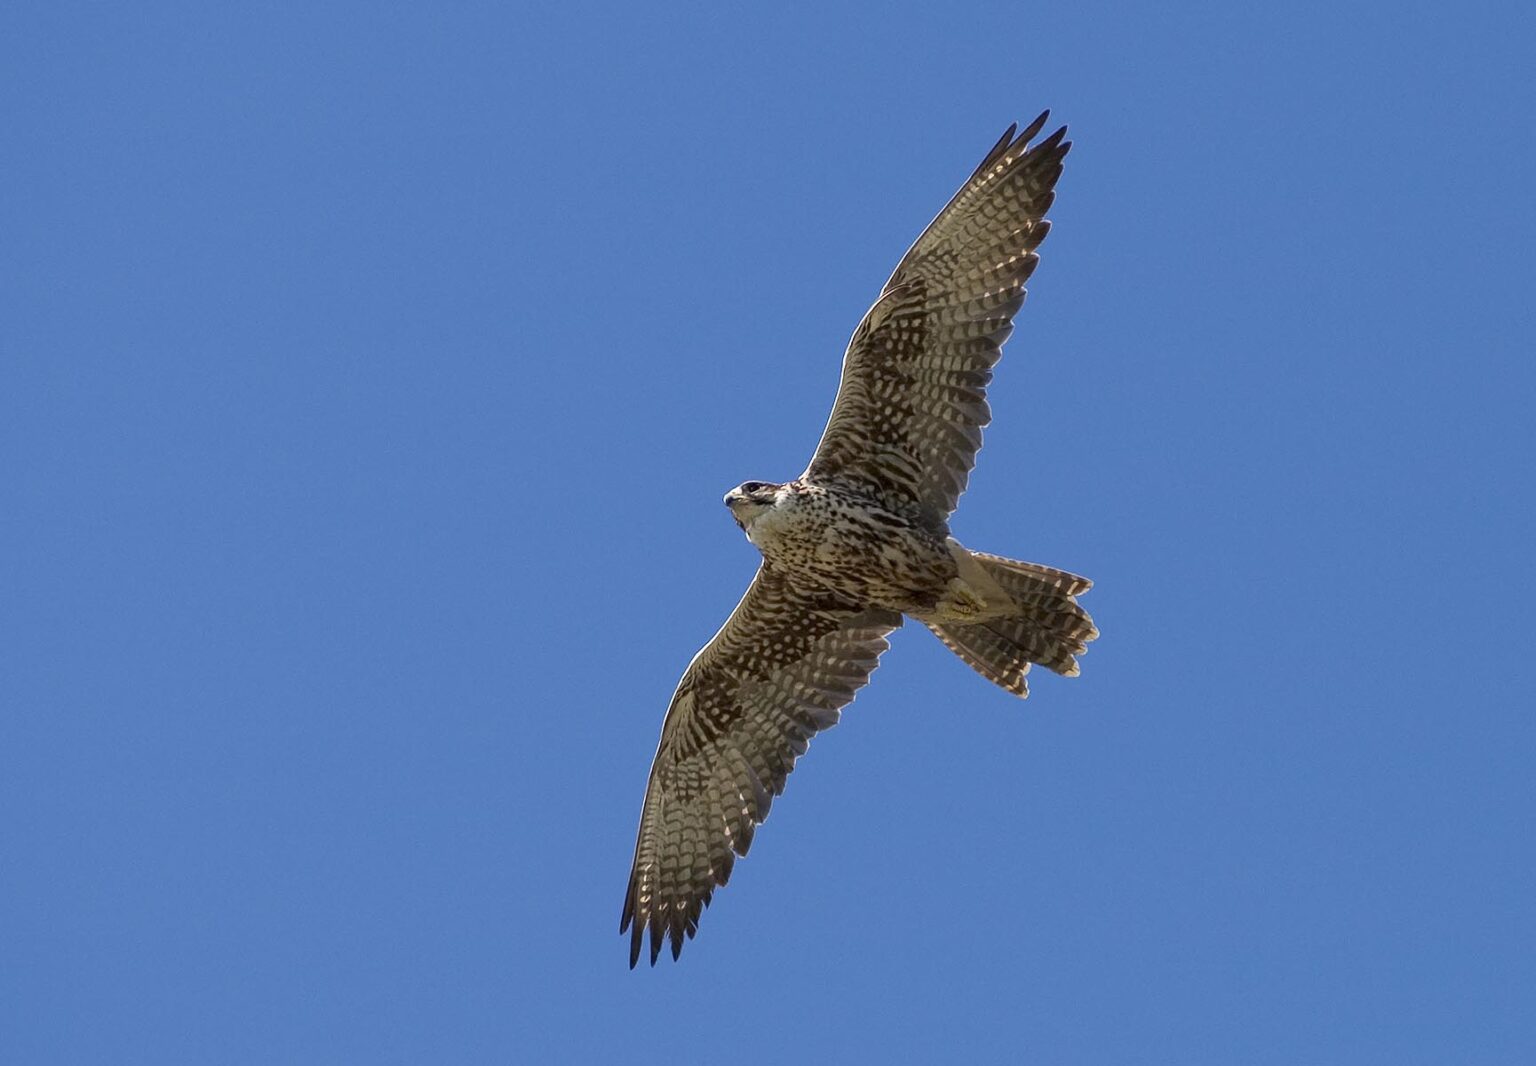 An endangered Saker Falcon (Falco cherrug), native to Southern Europe and Asia, sores above the ground hunting for food